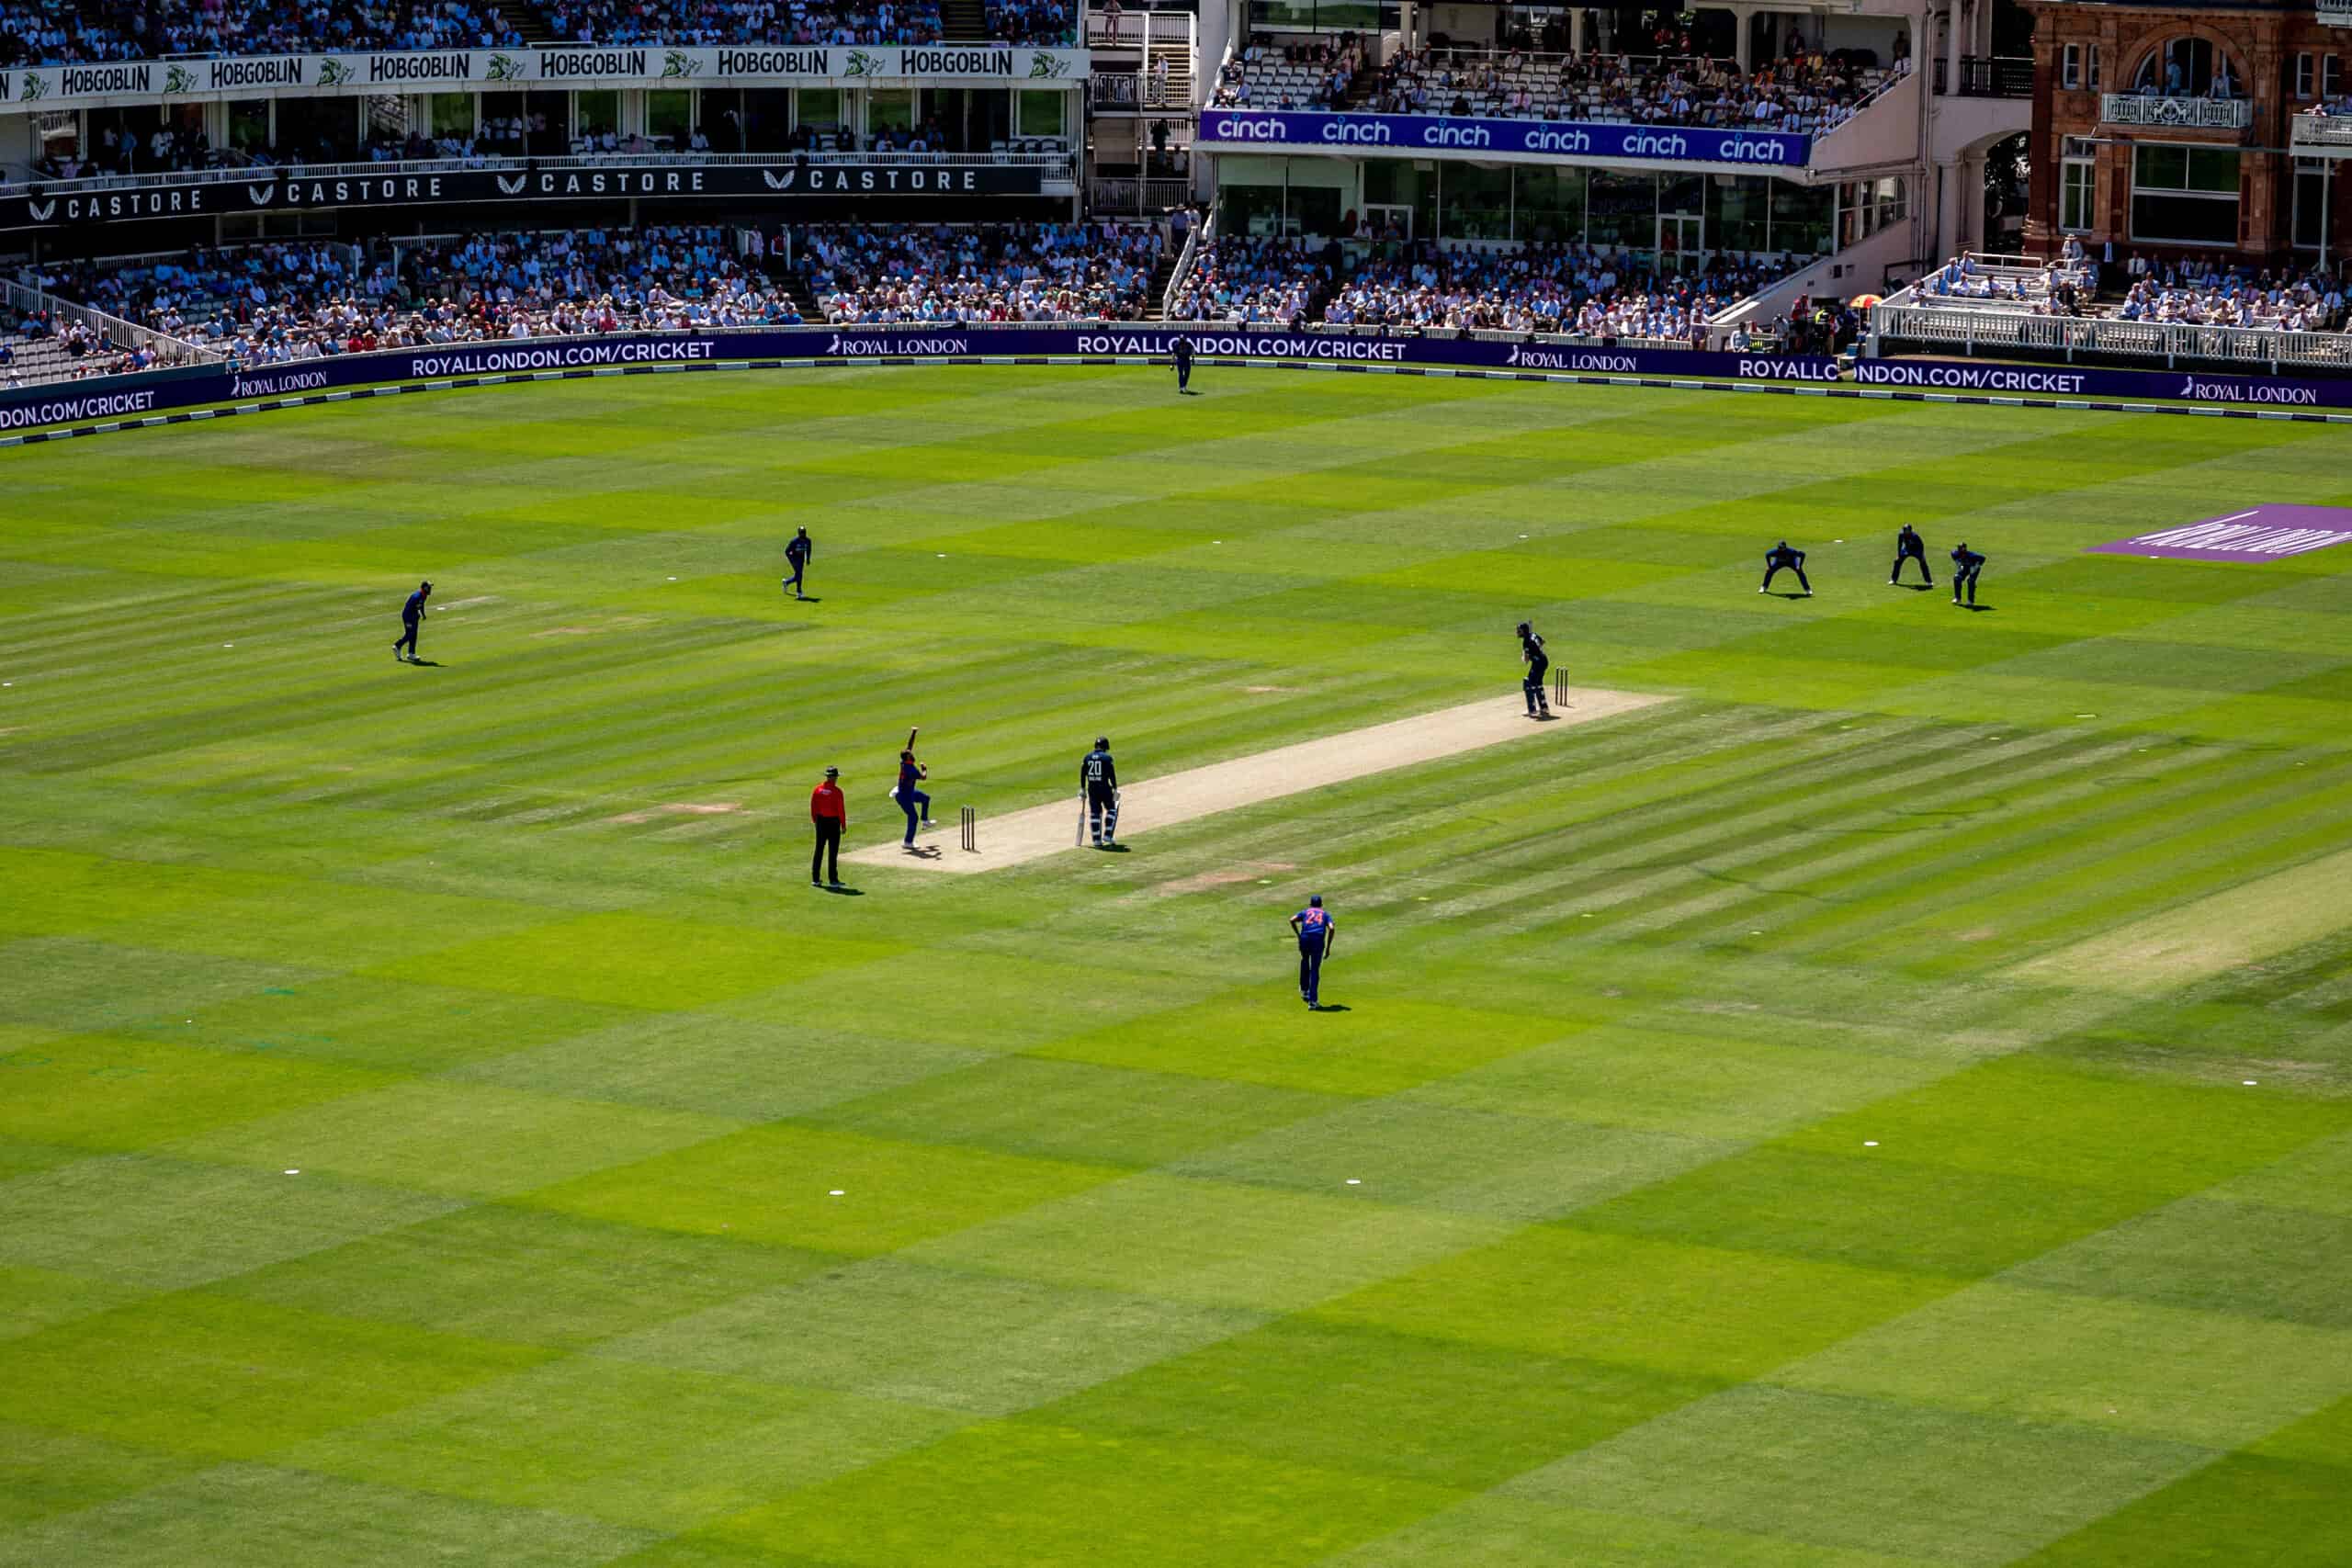 England face India in a One Day International at Lord's Cricket Ground